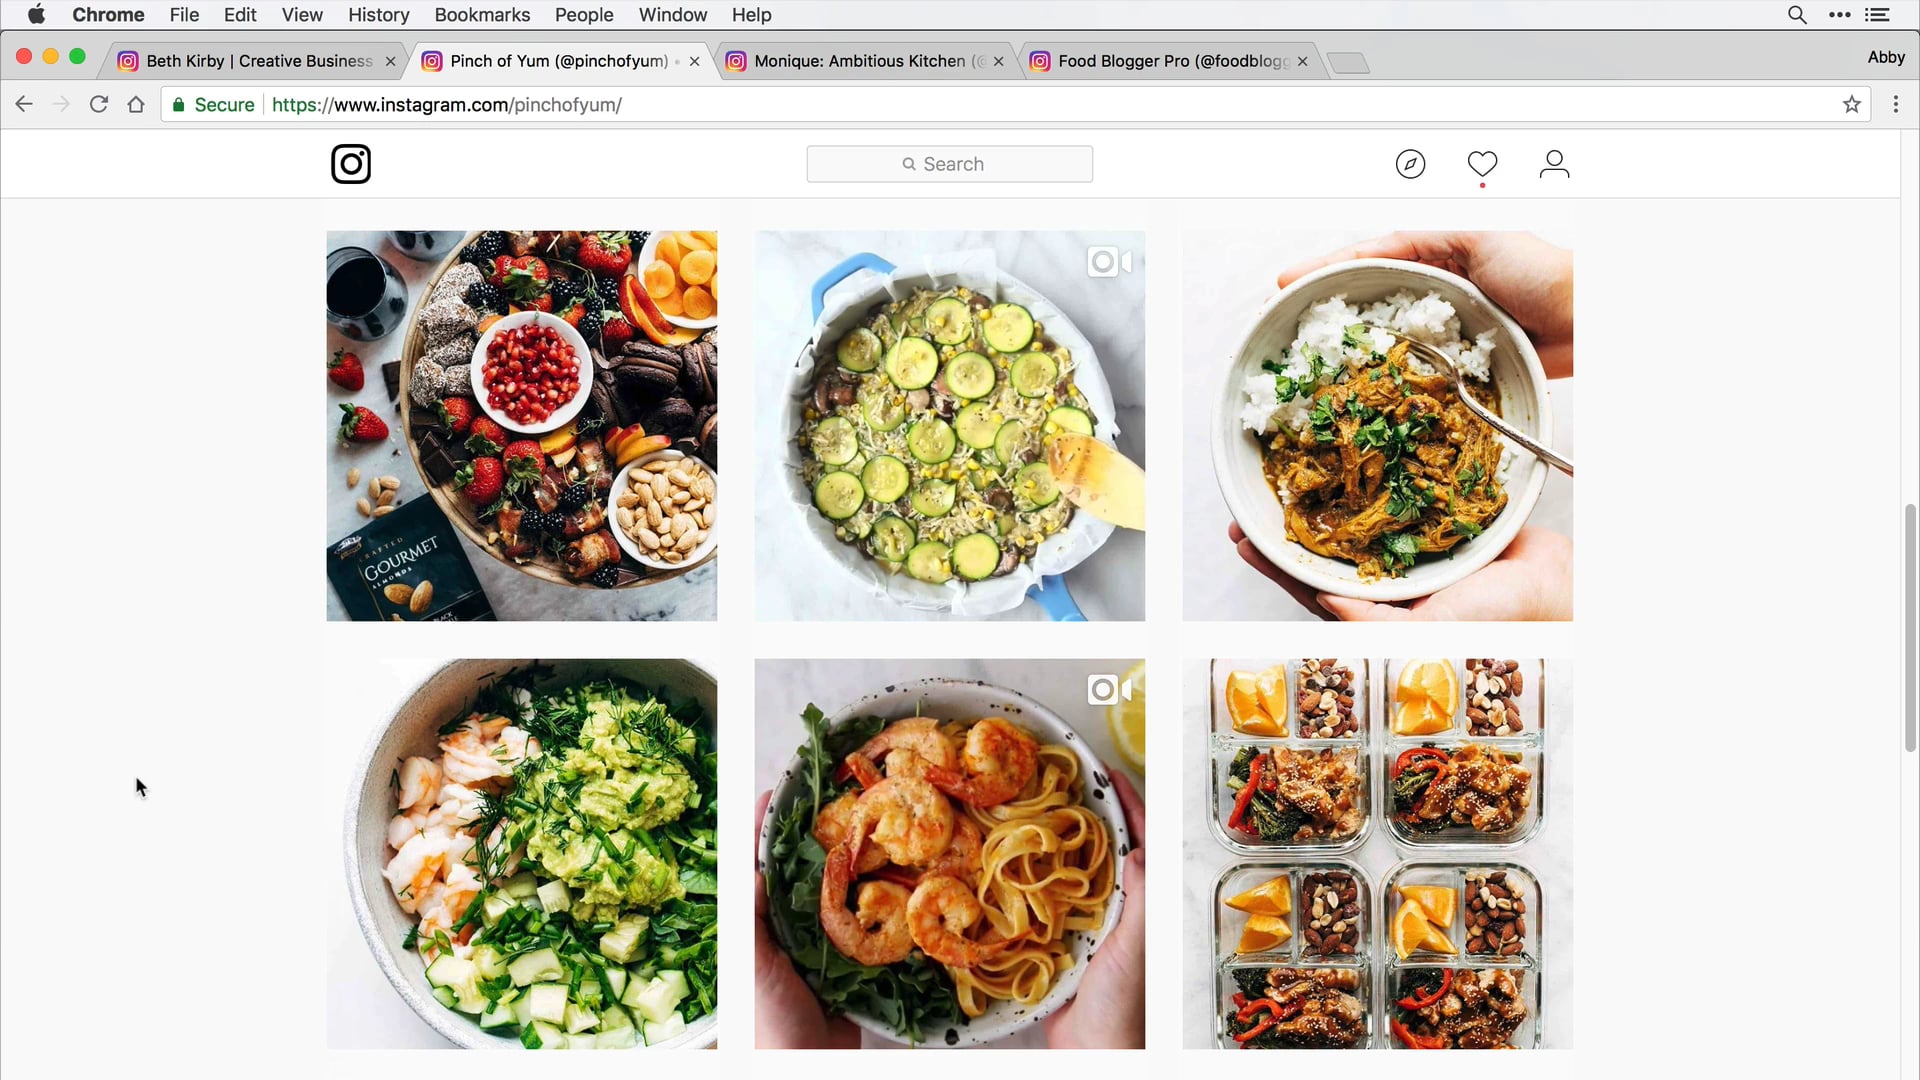 Screenshot of Pinch of Yum's Instagram account with six images of food shown